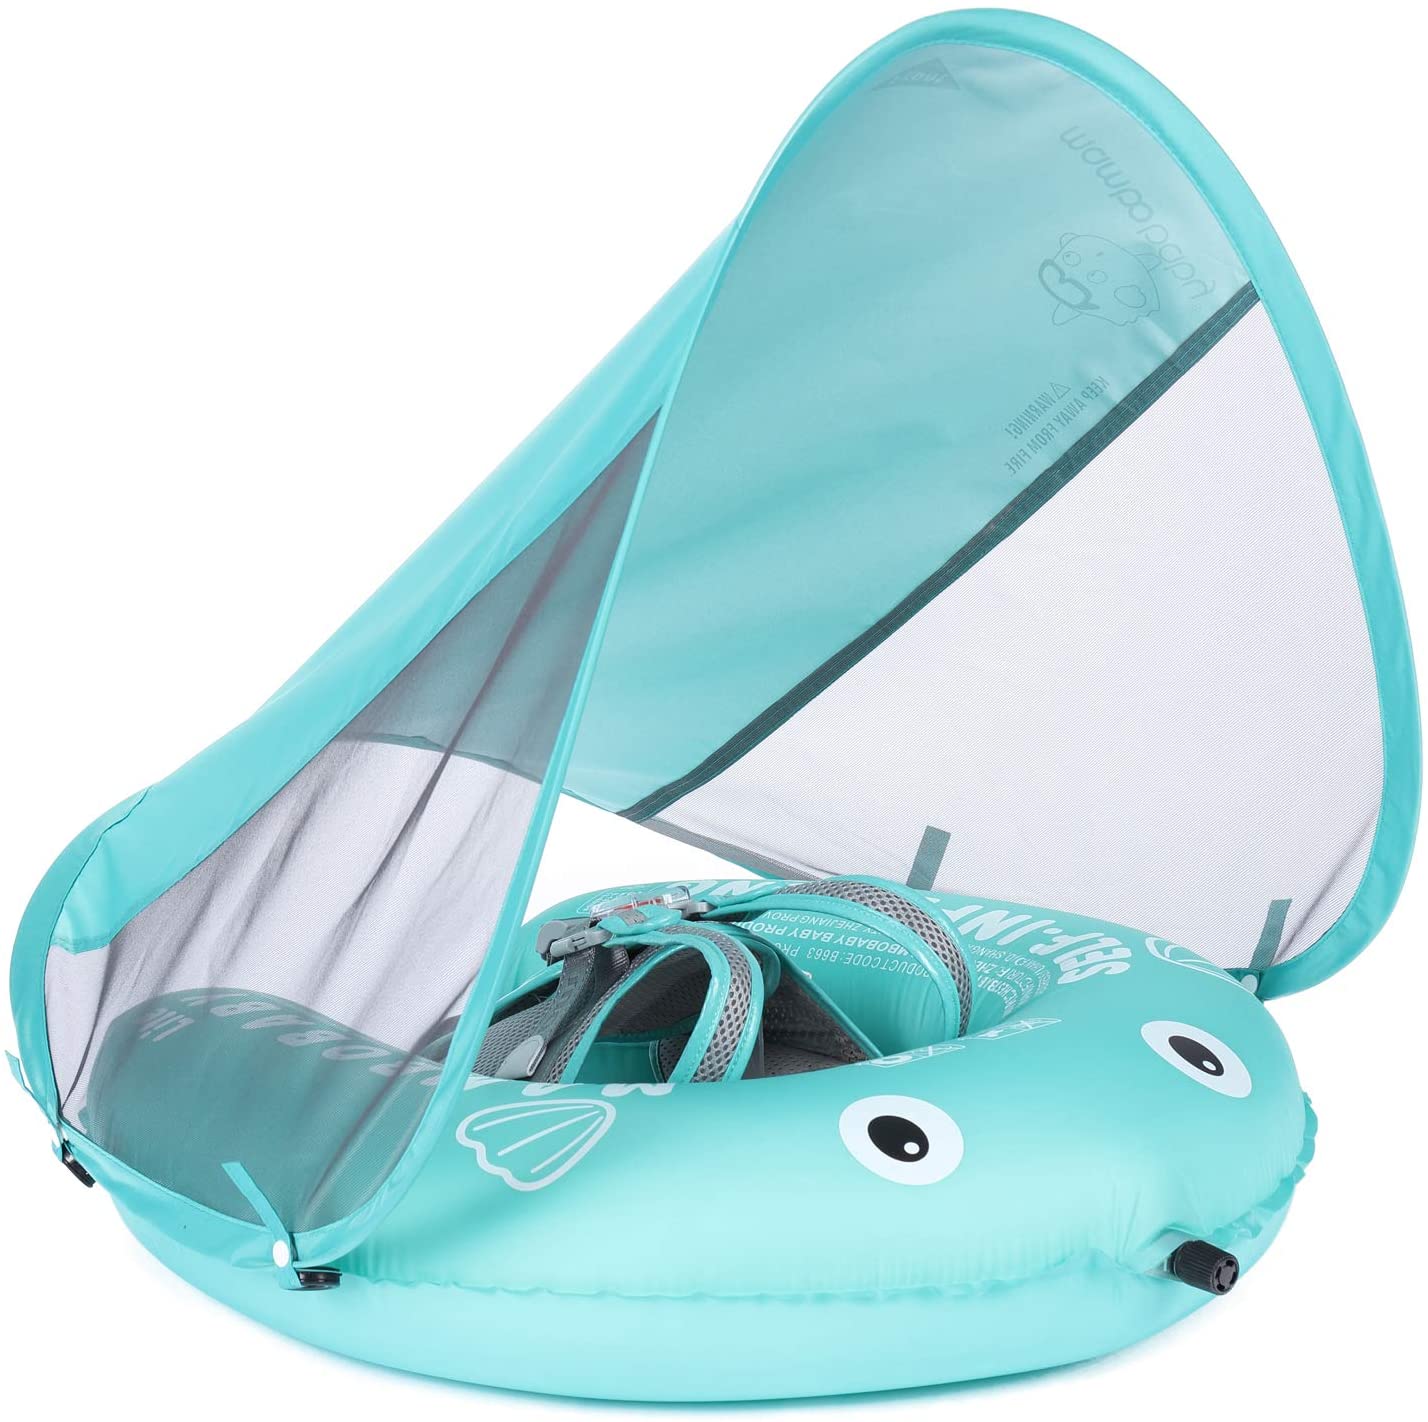 Proactive Baby Blue / United States Mambobaby Baby Self-Inflatable Baby Float with Canopy - Special Edition